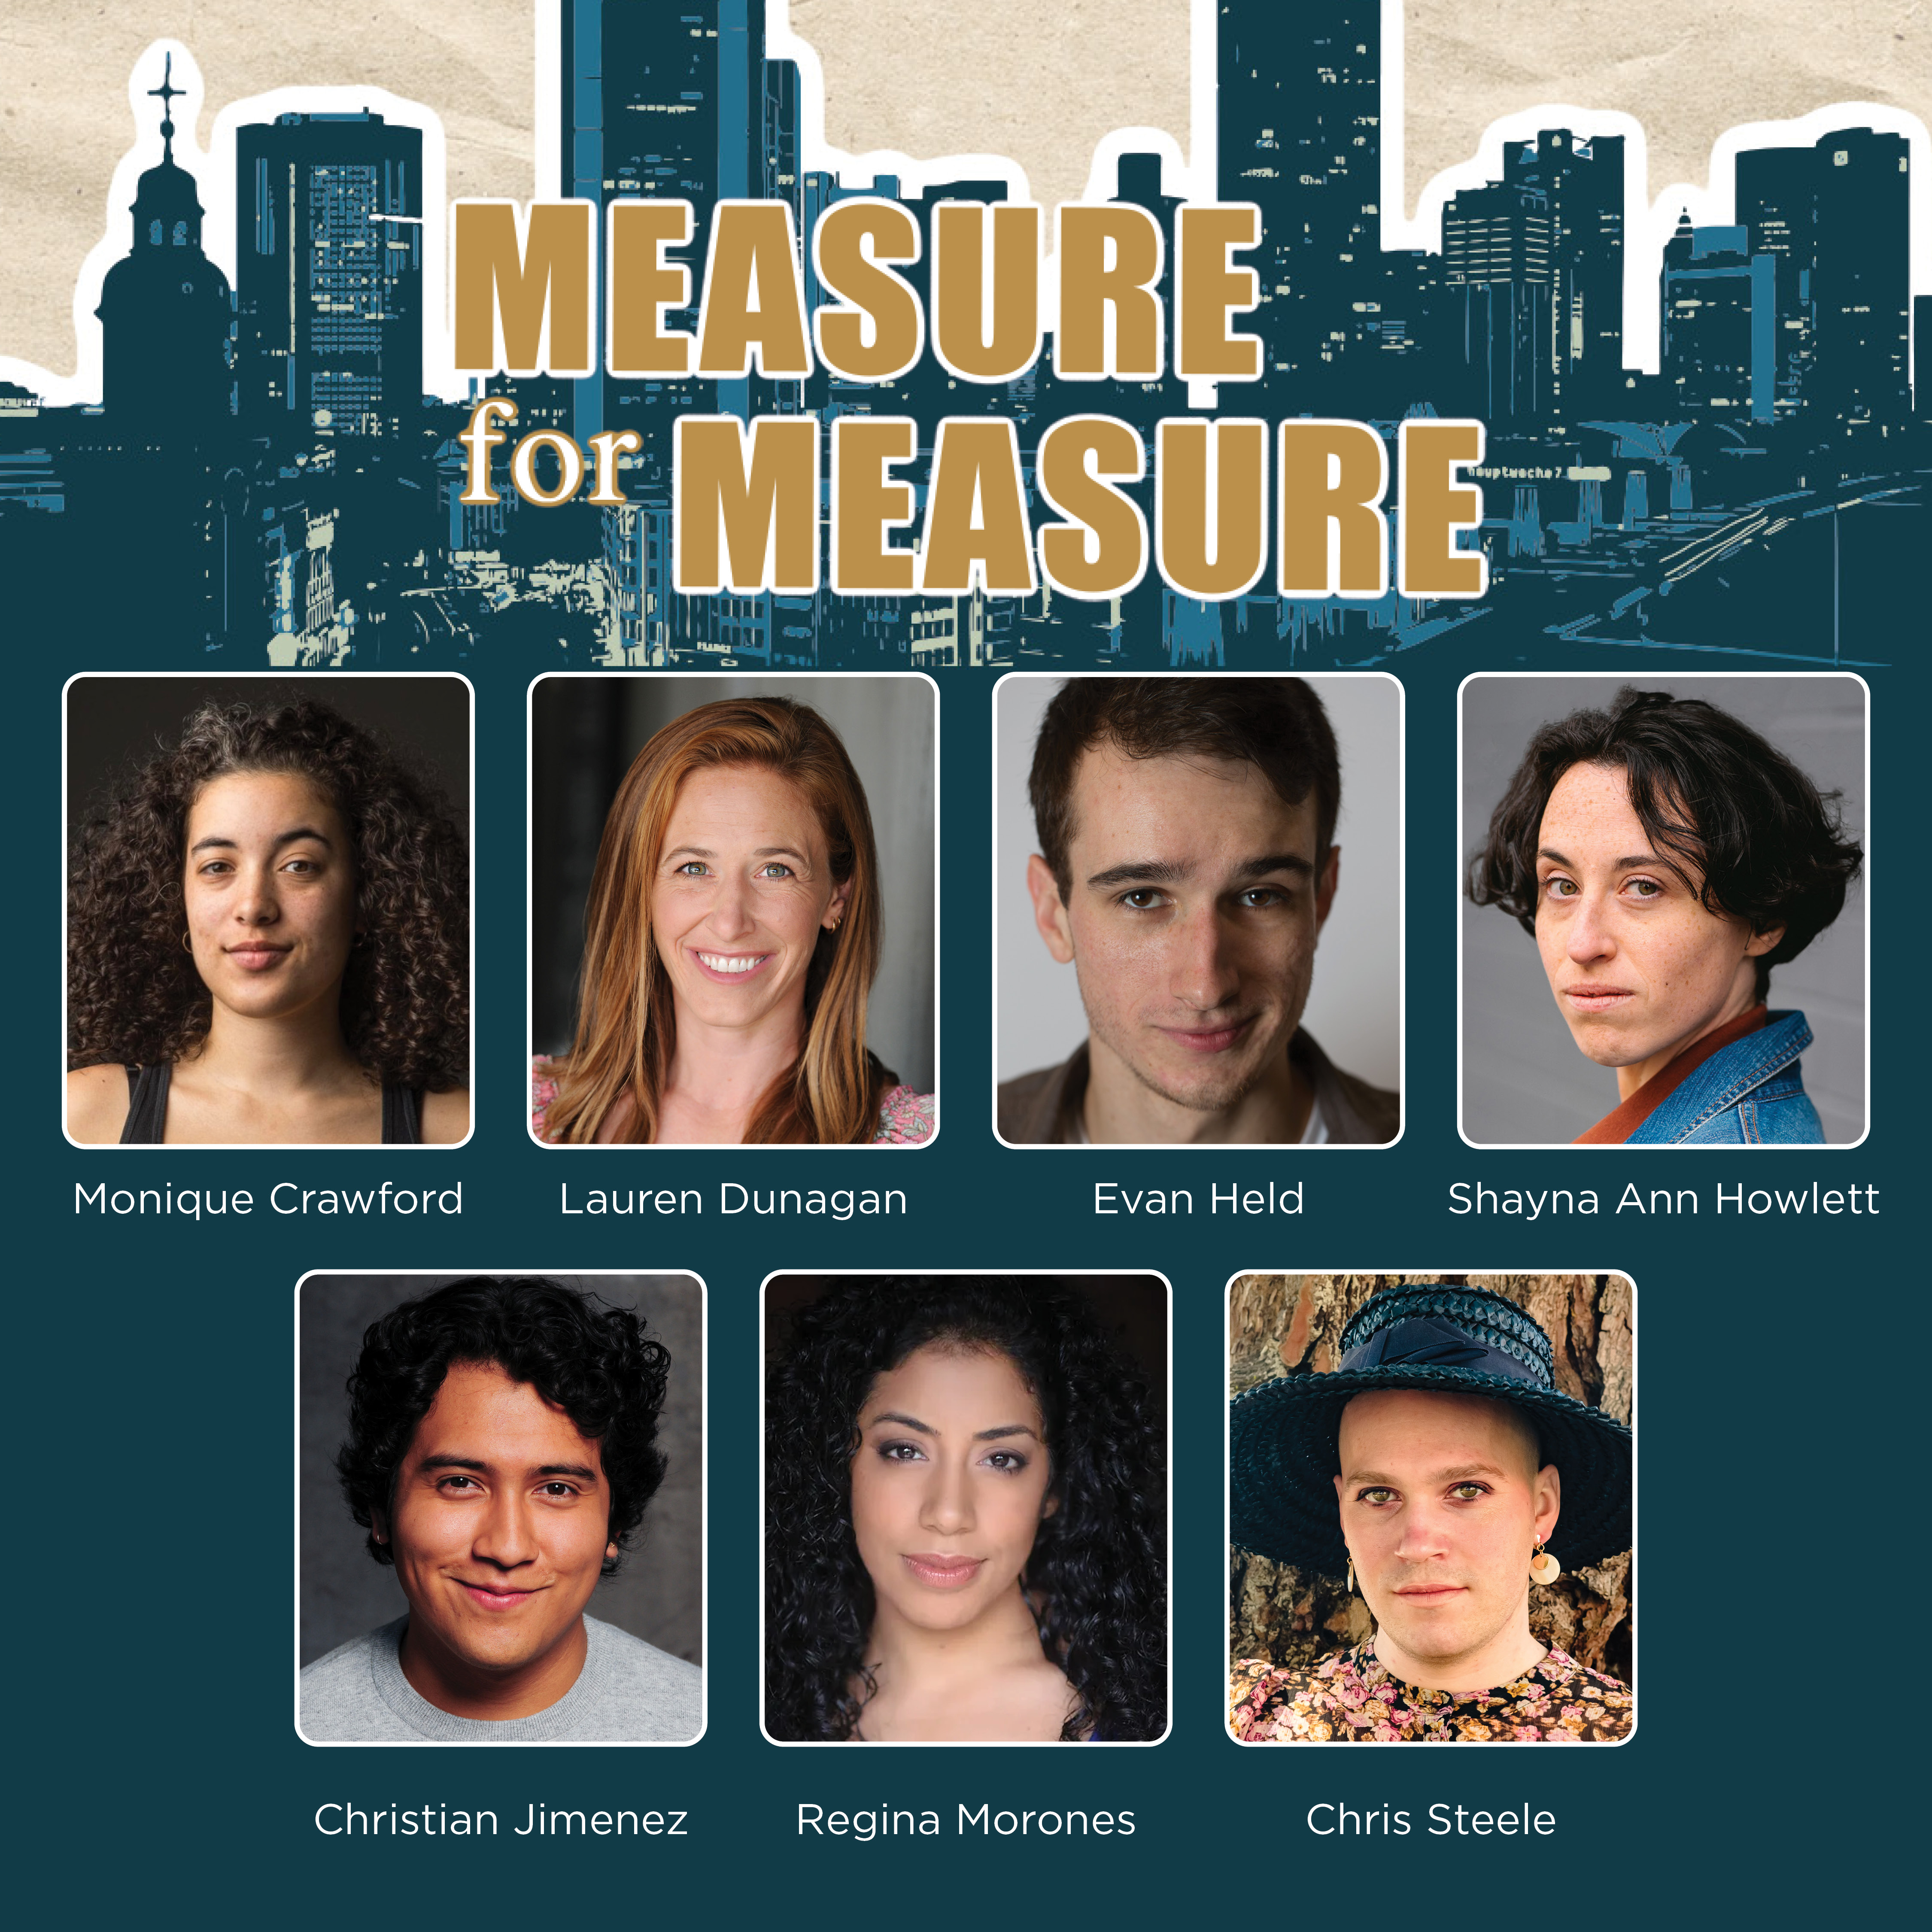 Cast of ACT's production of "Measure for Measure" at SMC